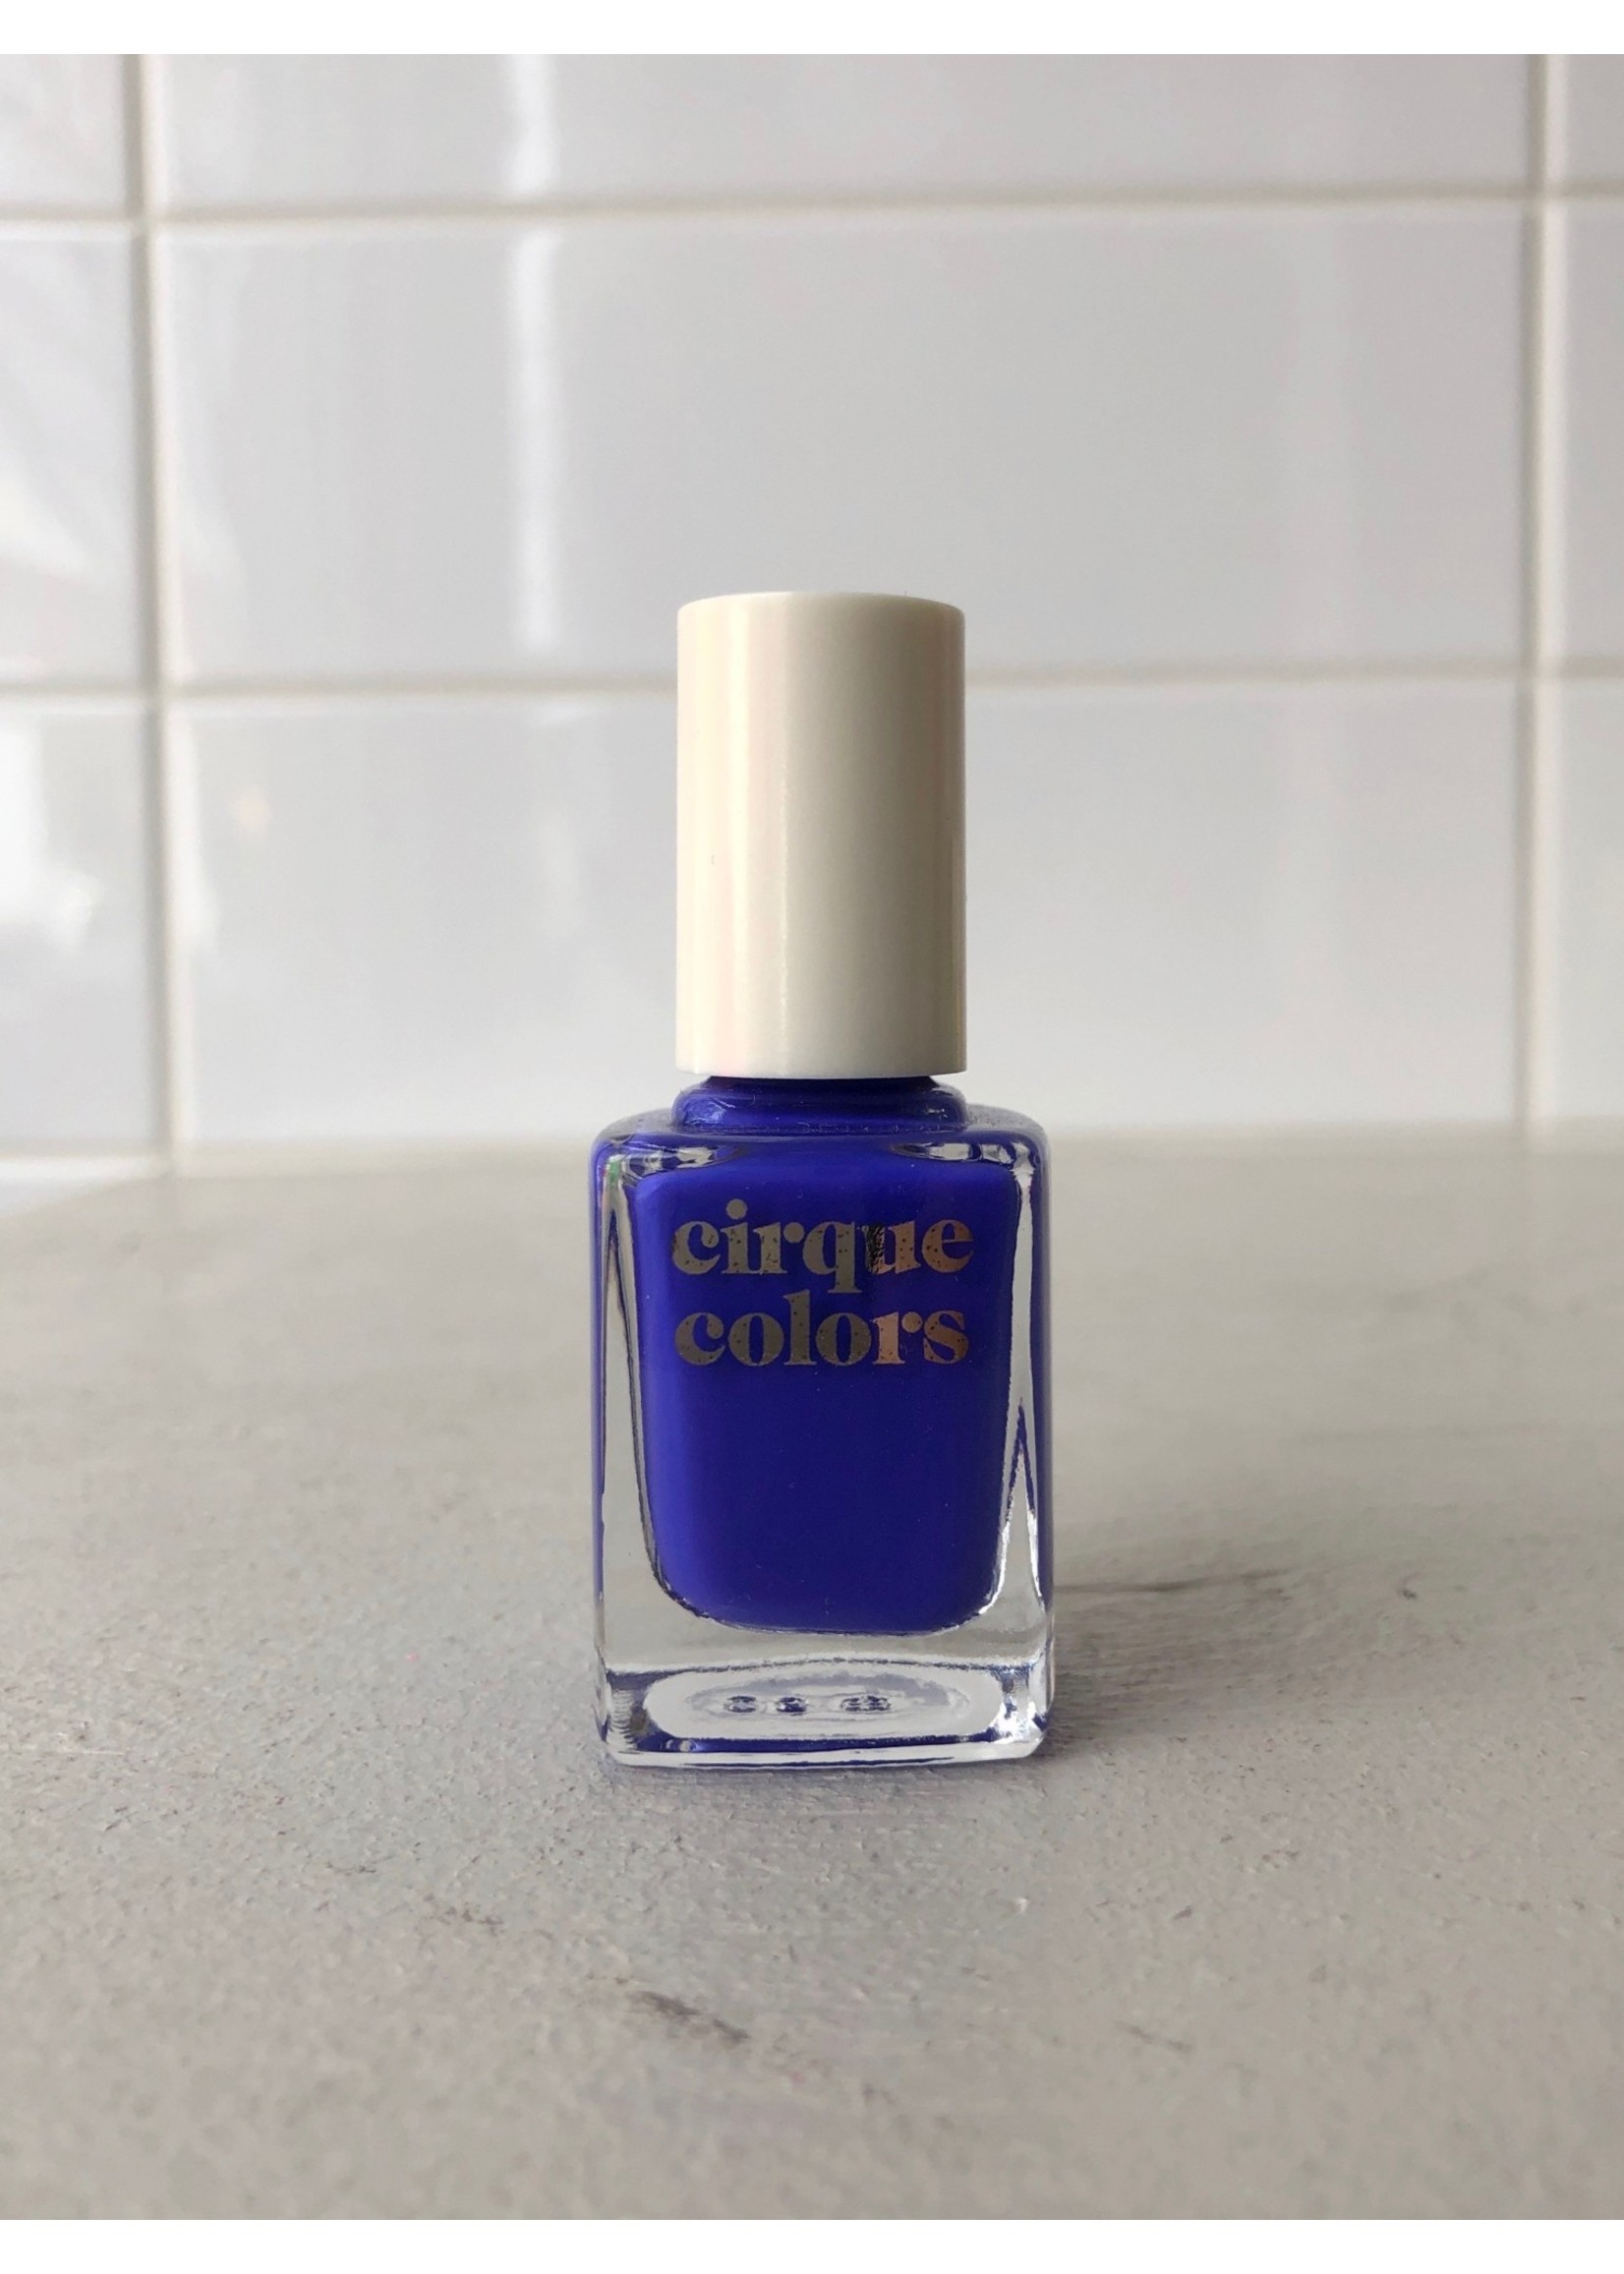 Cirque Colors Vice Nail Polishes by Cirque Colors